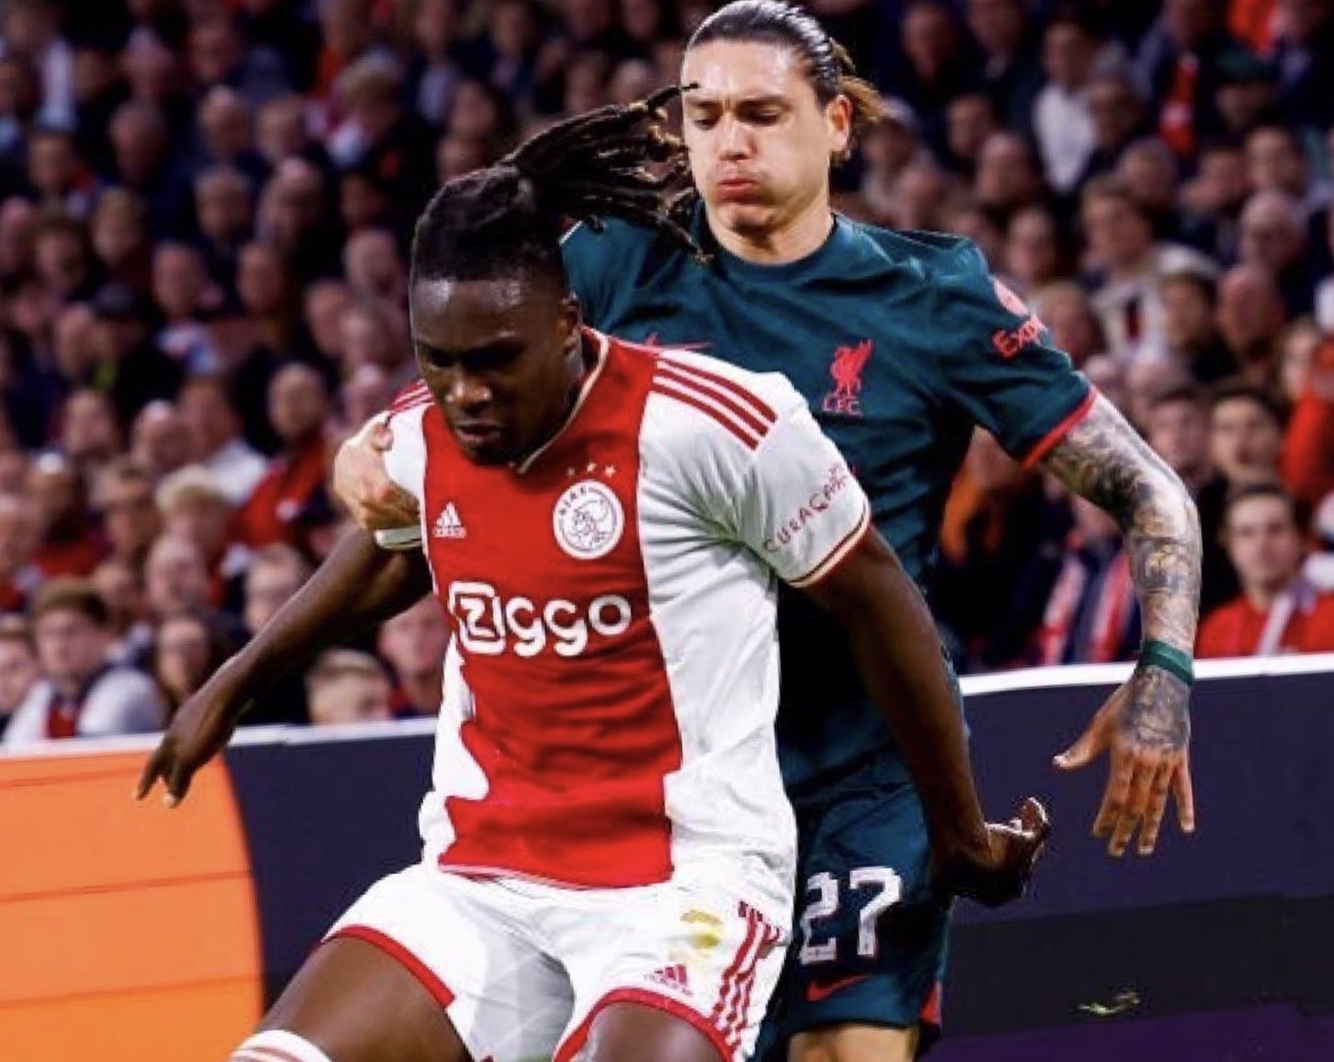 UCL: Bassey In Action As Ajax Suffer Heavy Home Defeat Vs Liverpool; Osimhen Benched In Napoli Win